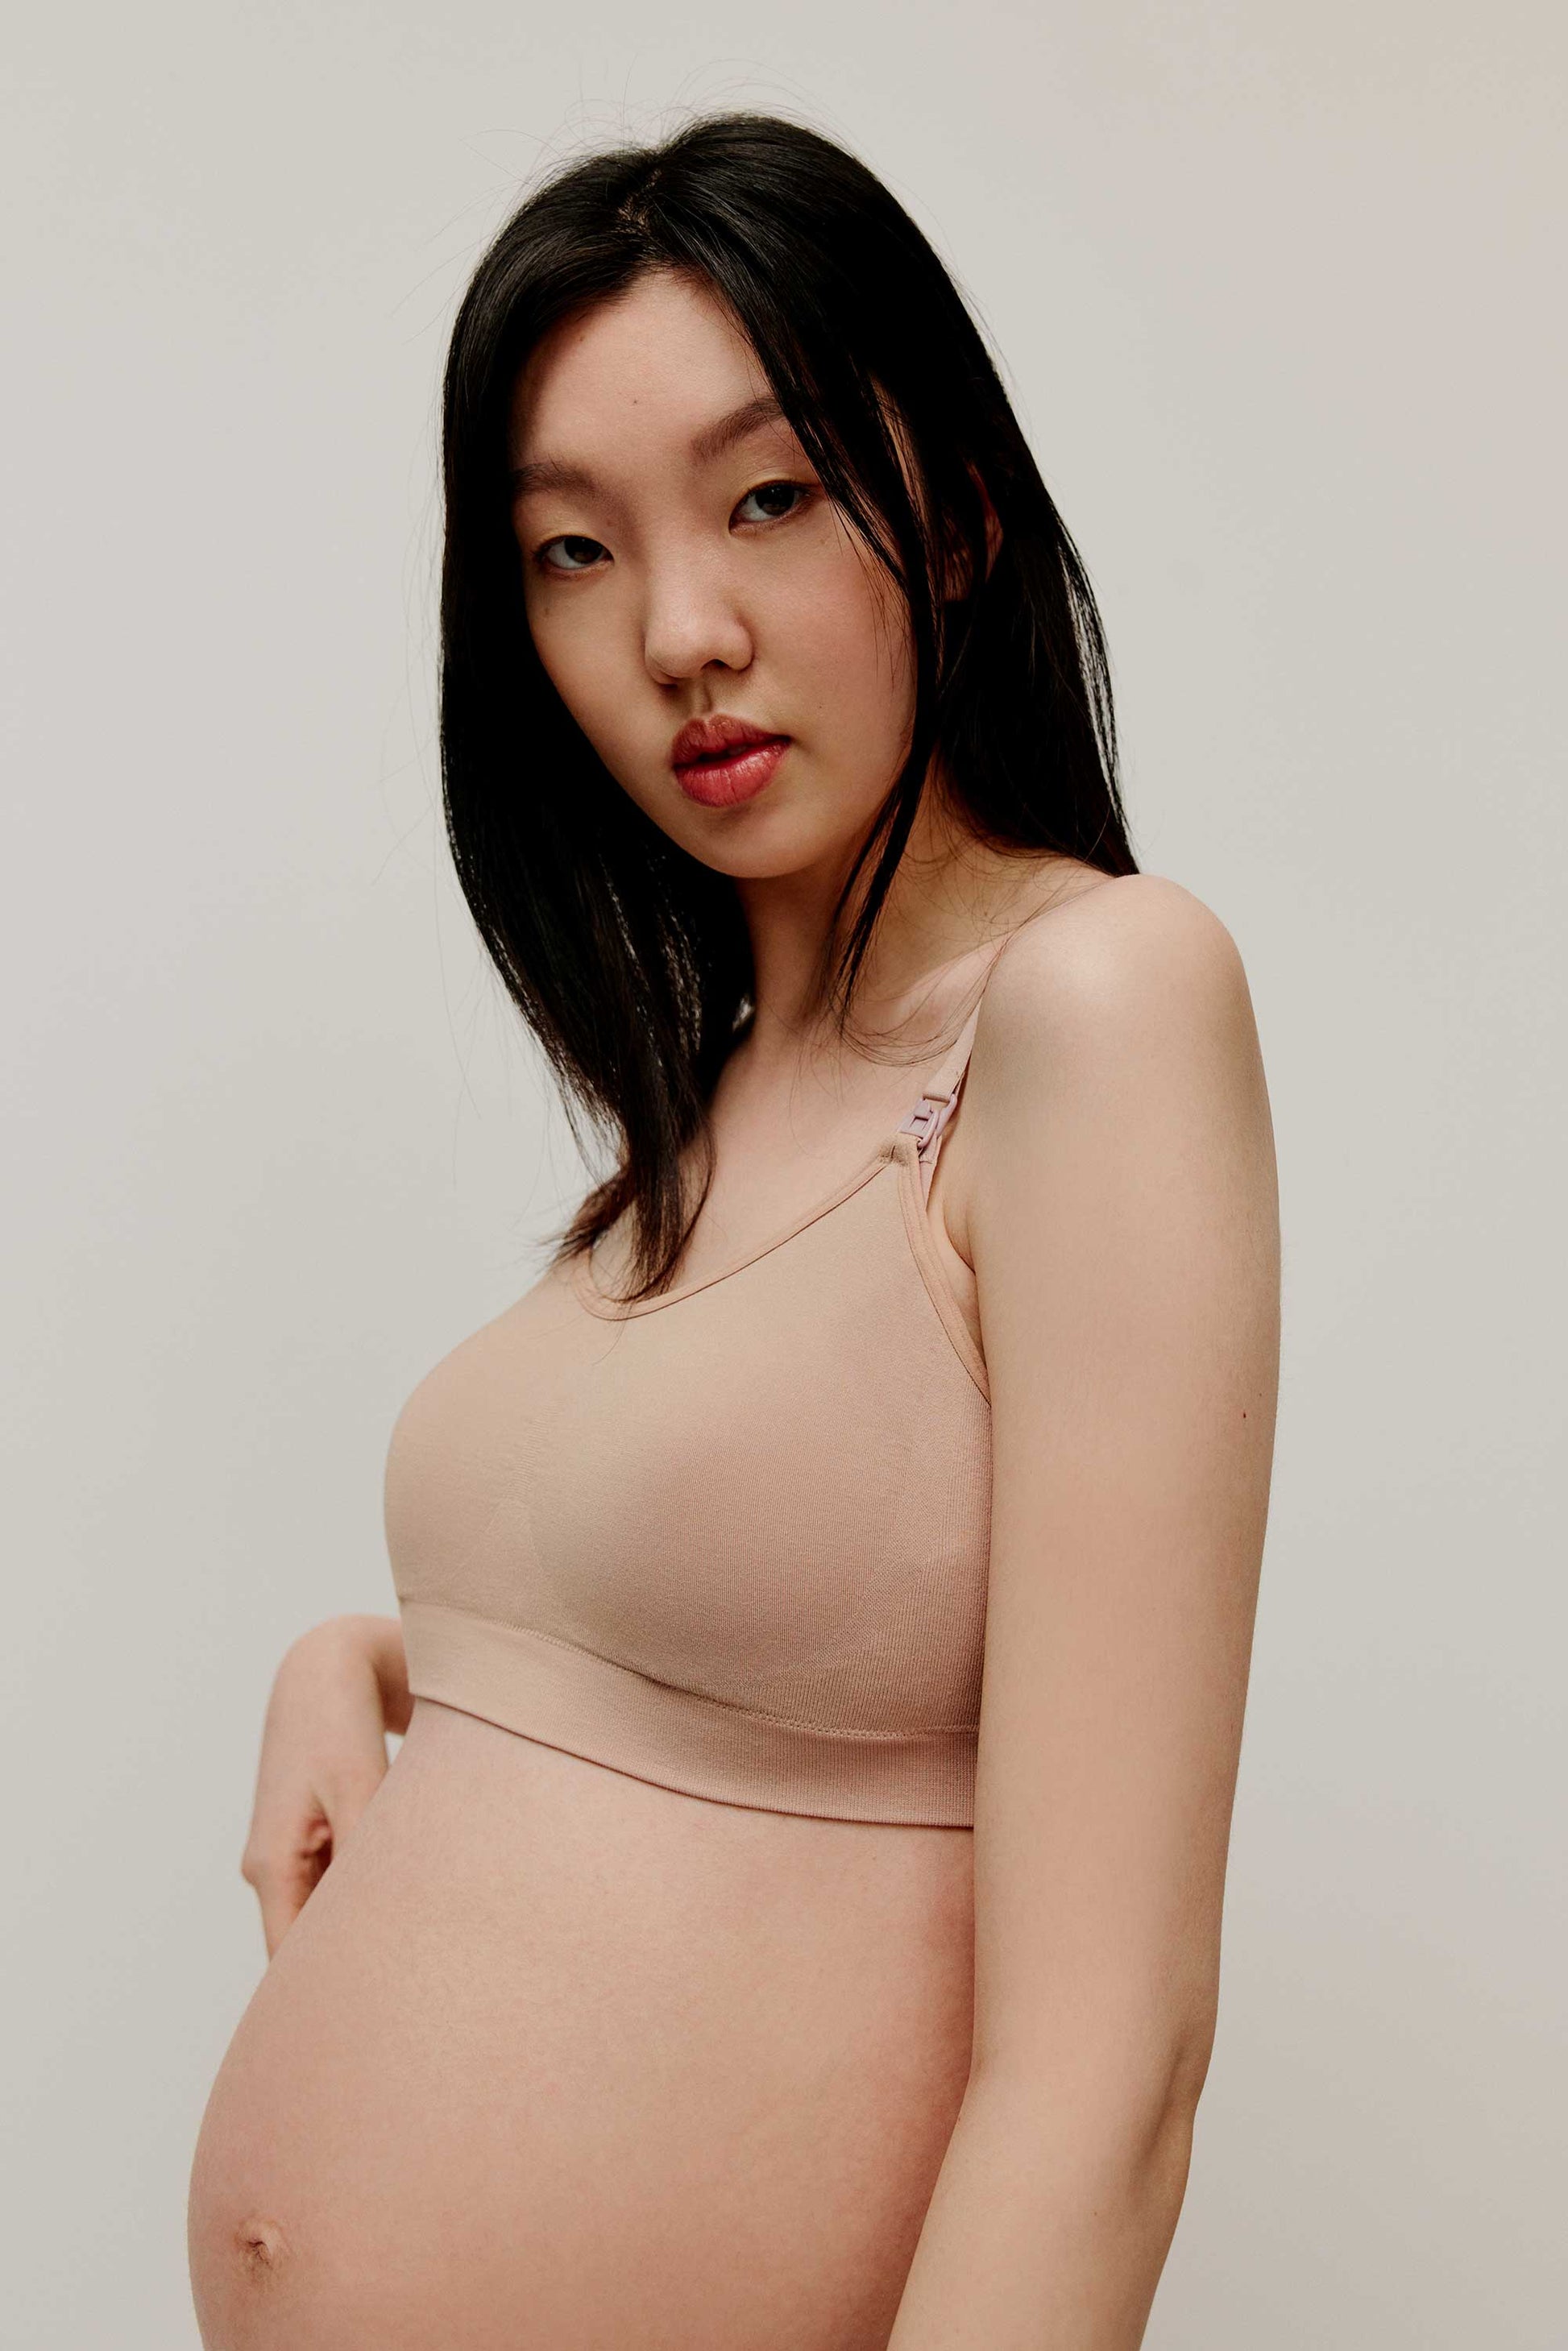 YATEMAO Lace Maternity Nursing Bra For Breastfeeding Comfortable Bra And  Underwear For Pregnant Women Soutien Gorge Allaitement Y0925 From  Mengqiqi05, $13.04